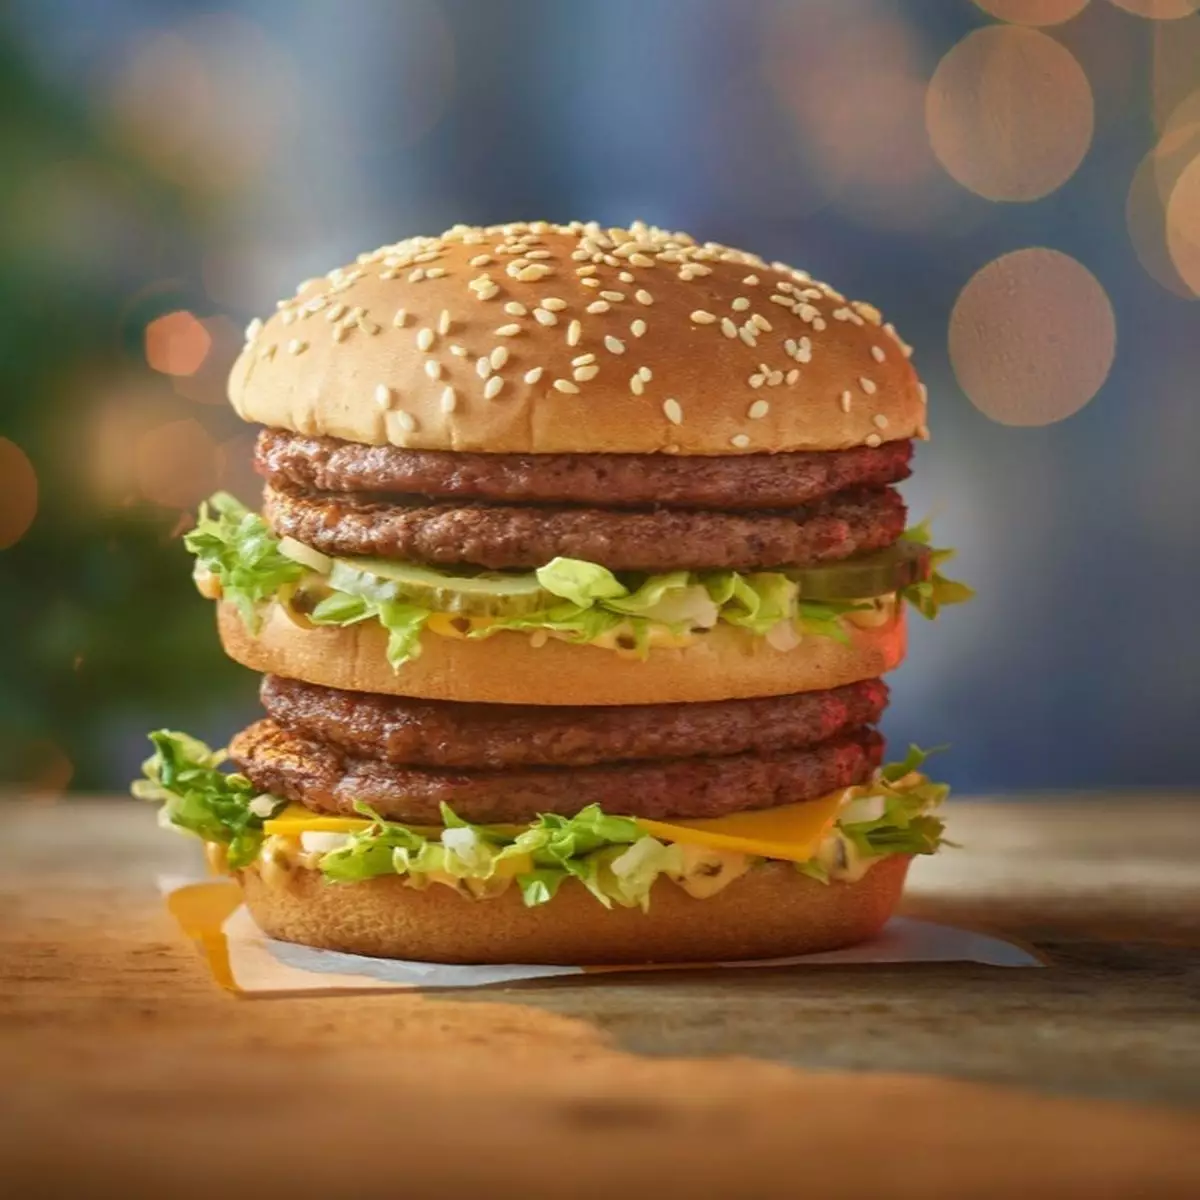 The Double Big Mac is available now.